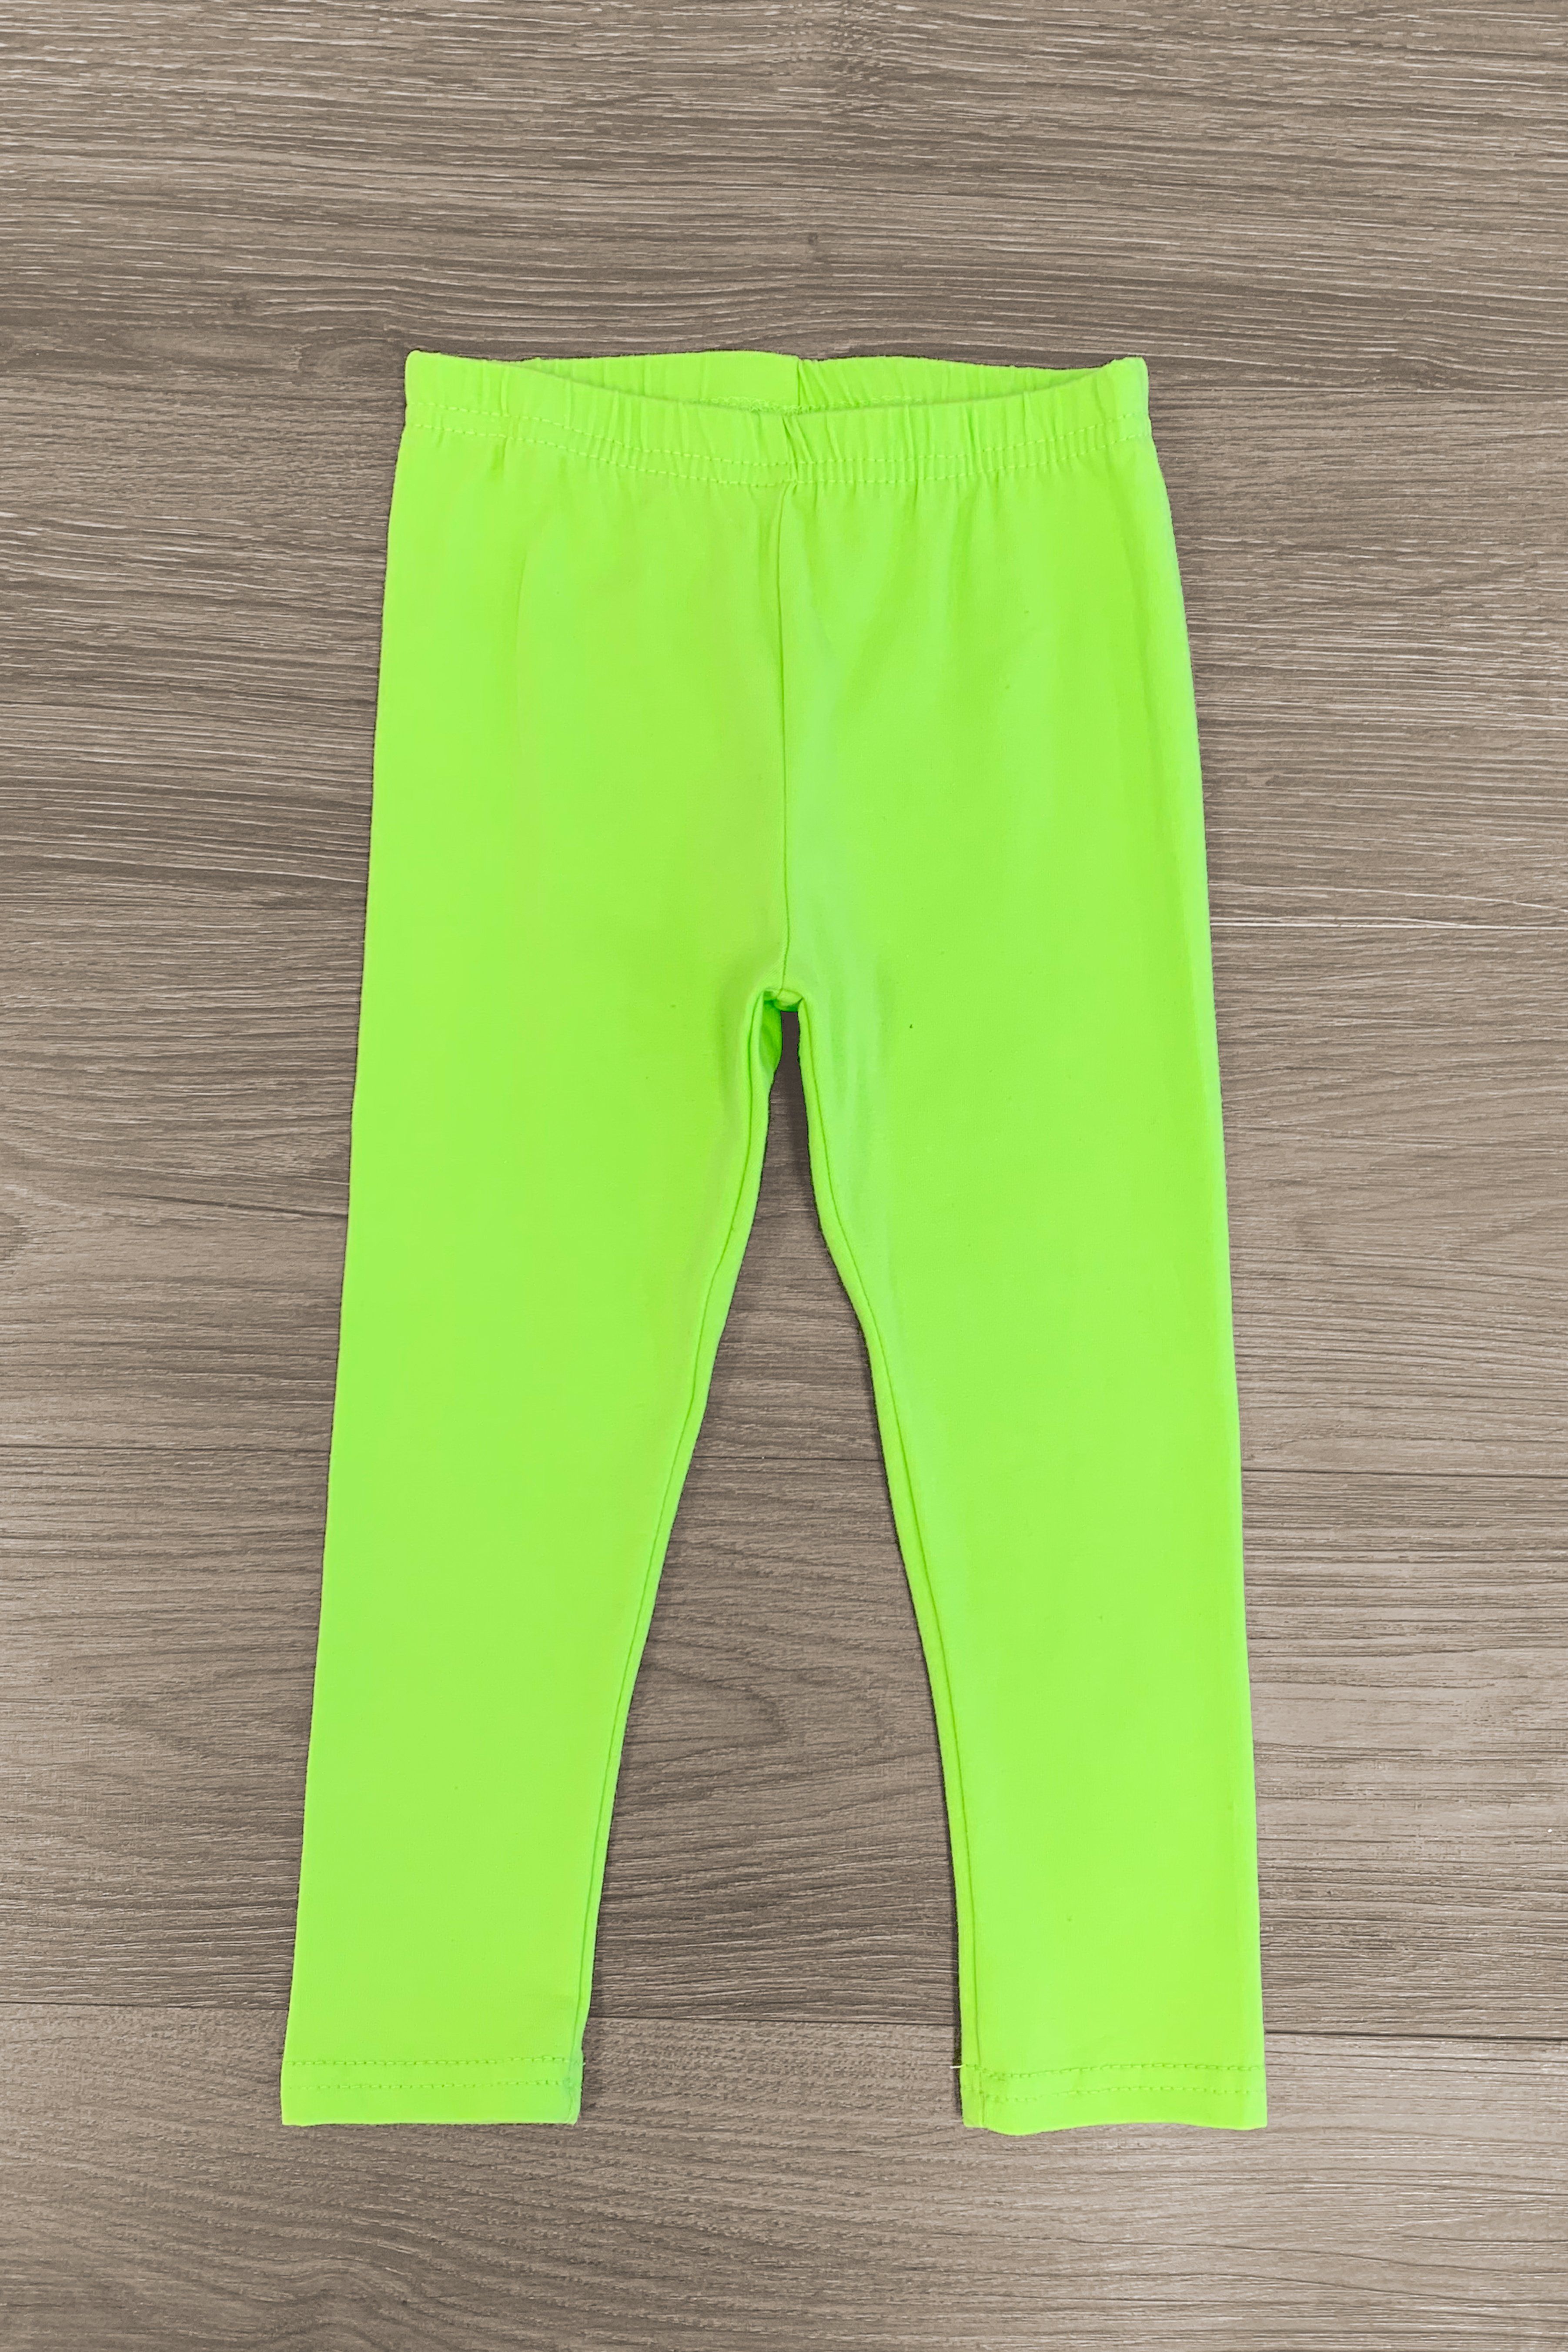 Bright green lime neon color Leggings by PalitraArt